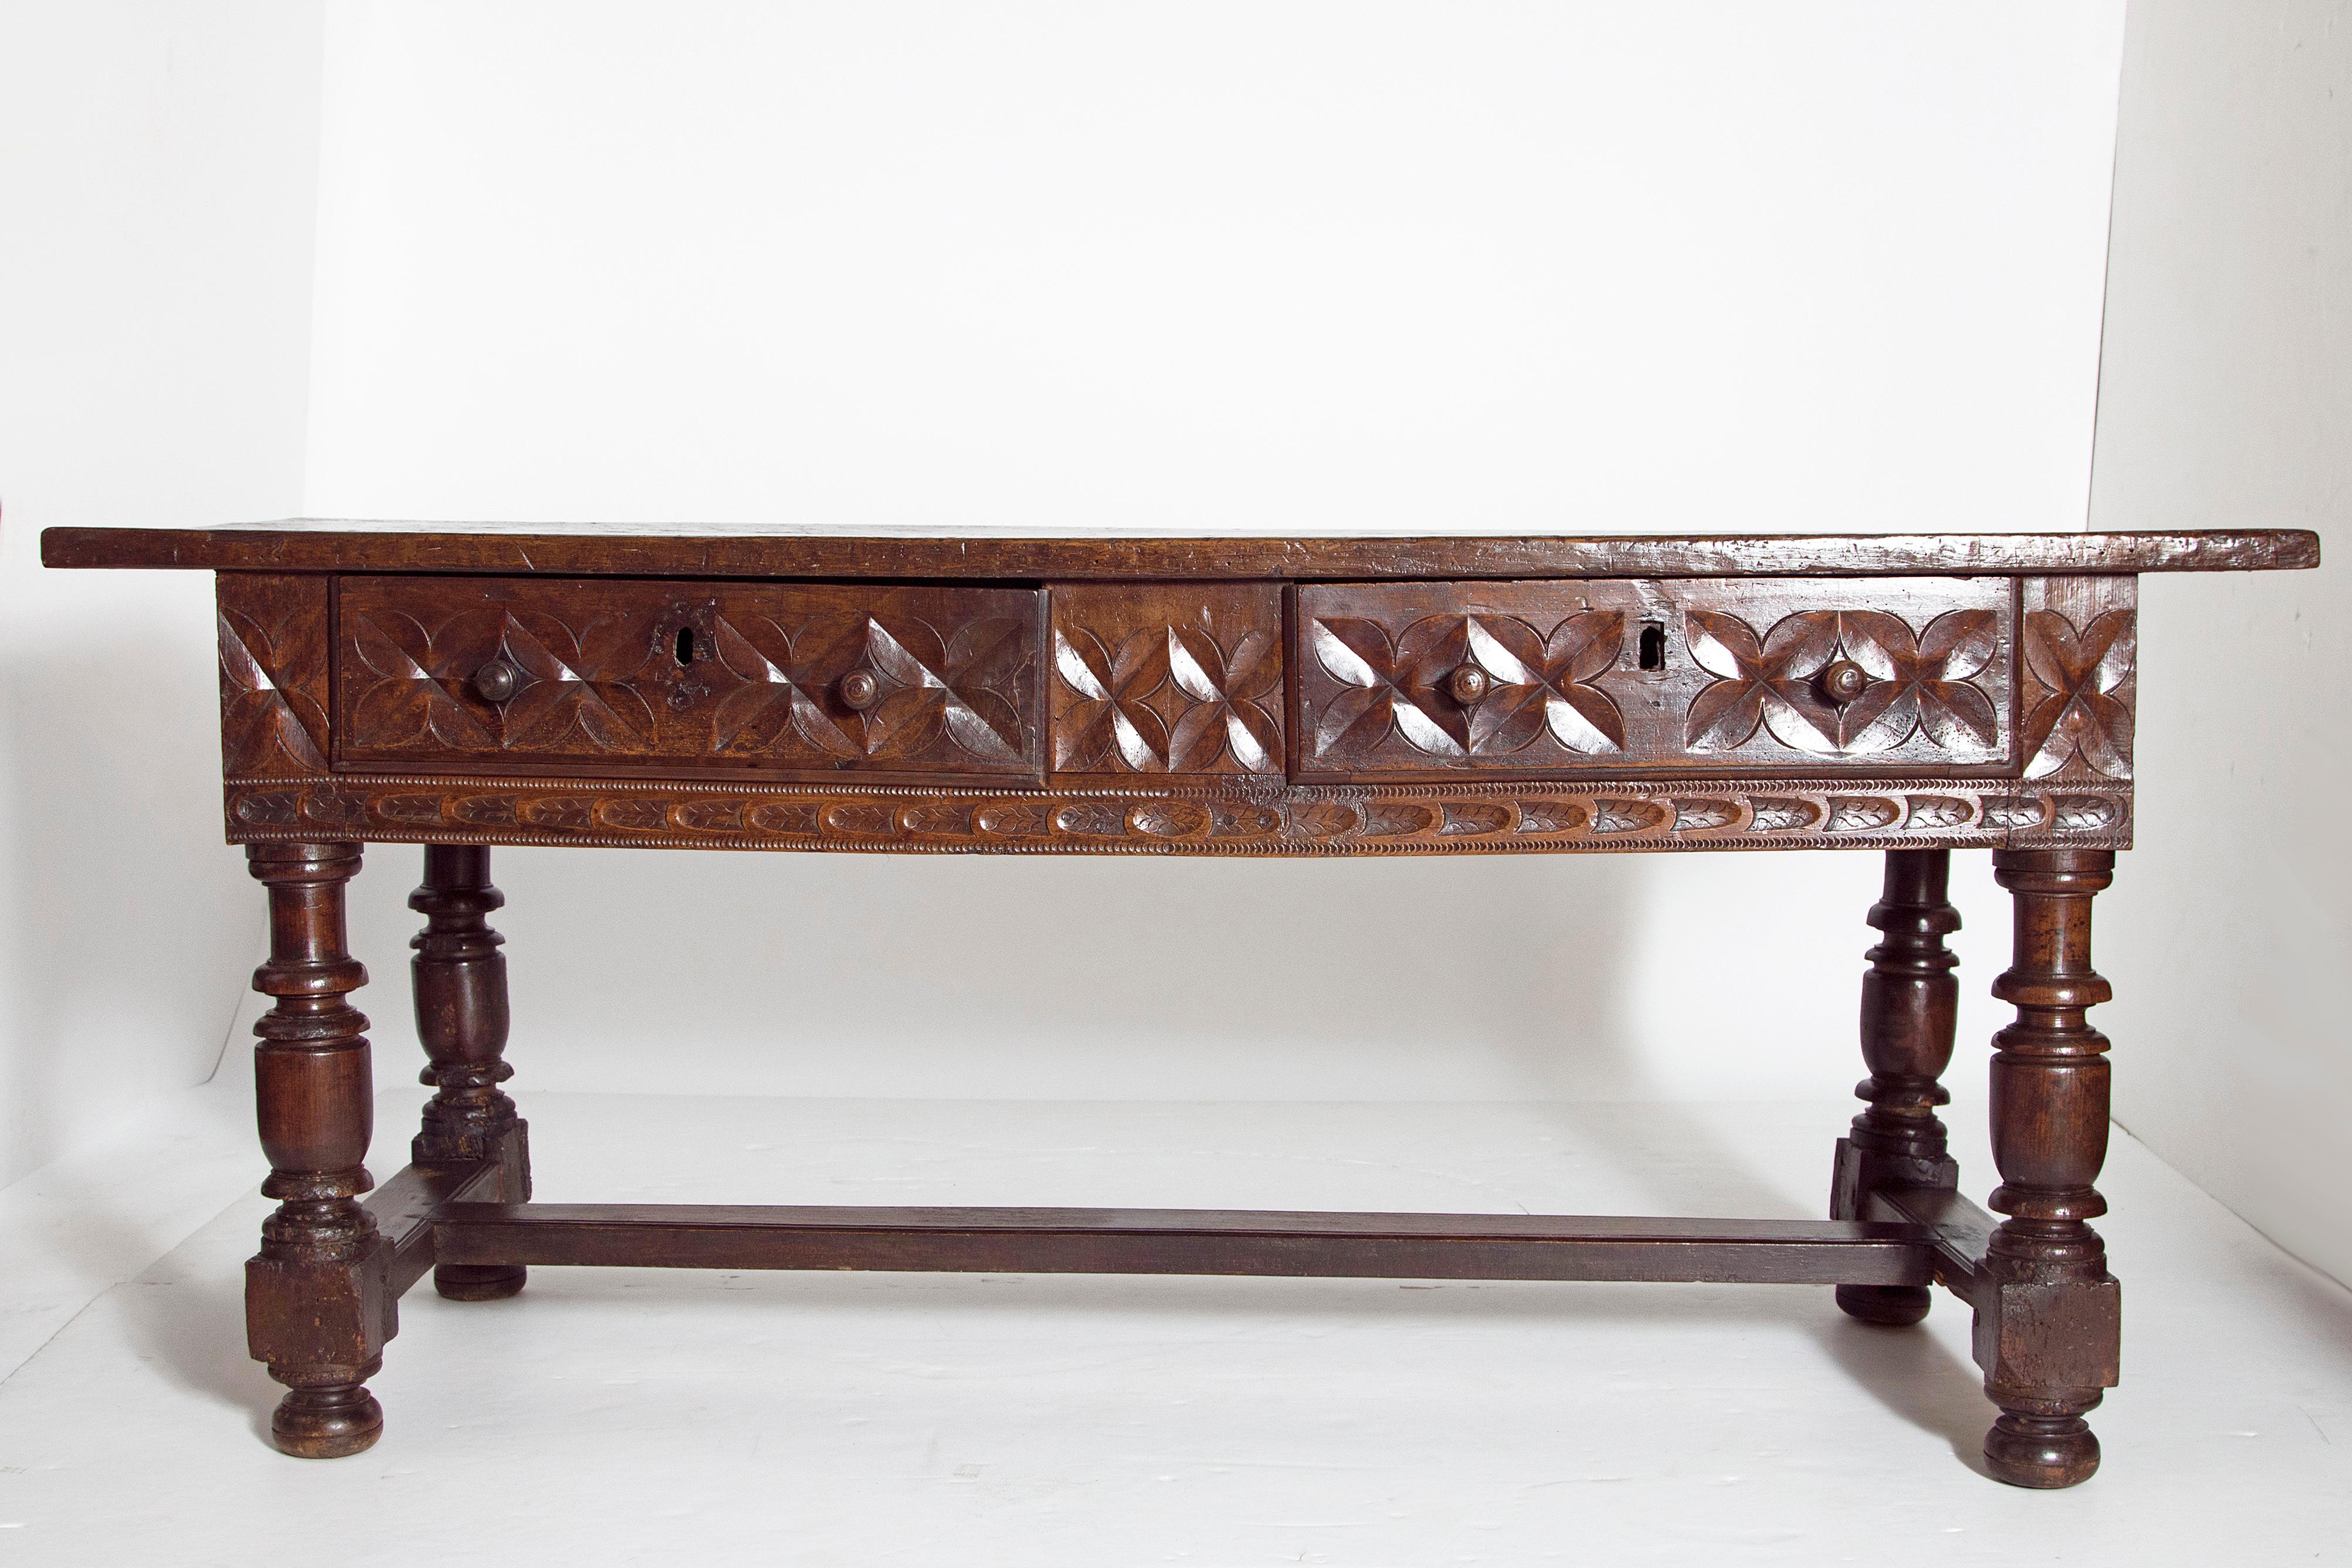 Hand-Carved Late 17th Century Spanish Baroque Walnut Centre Table